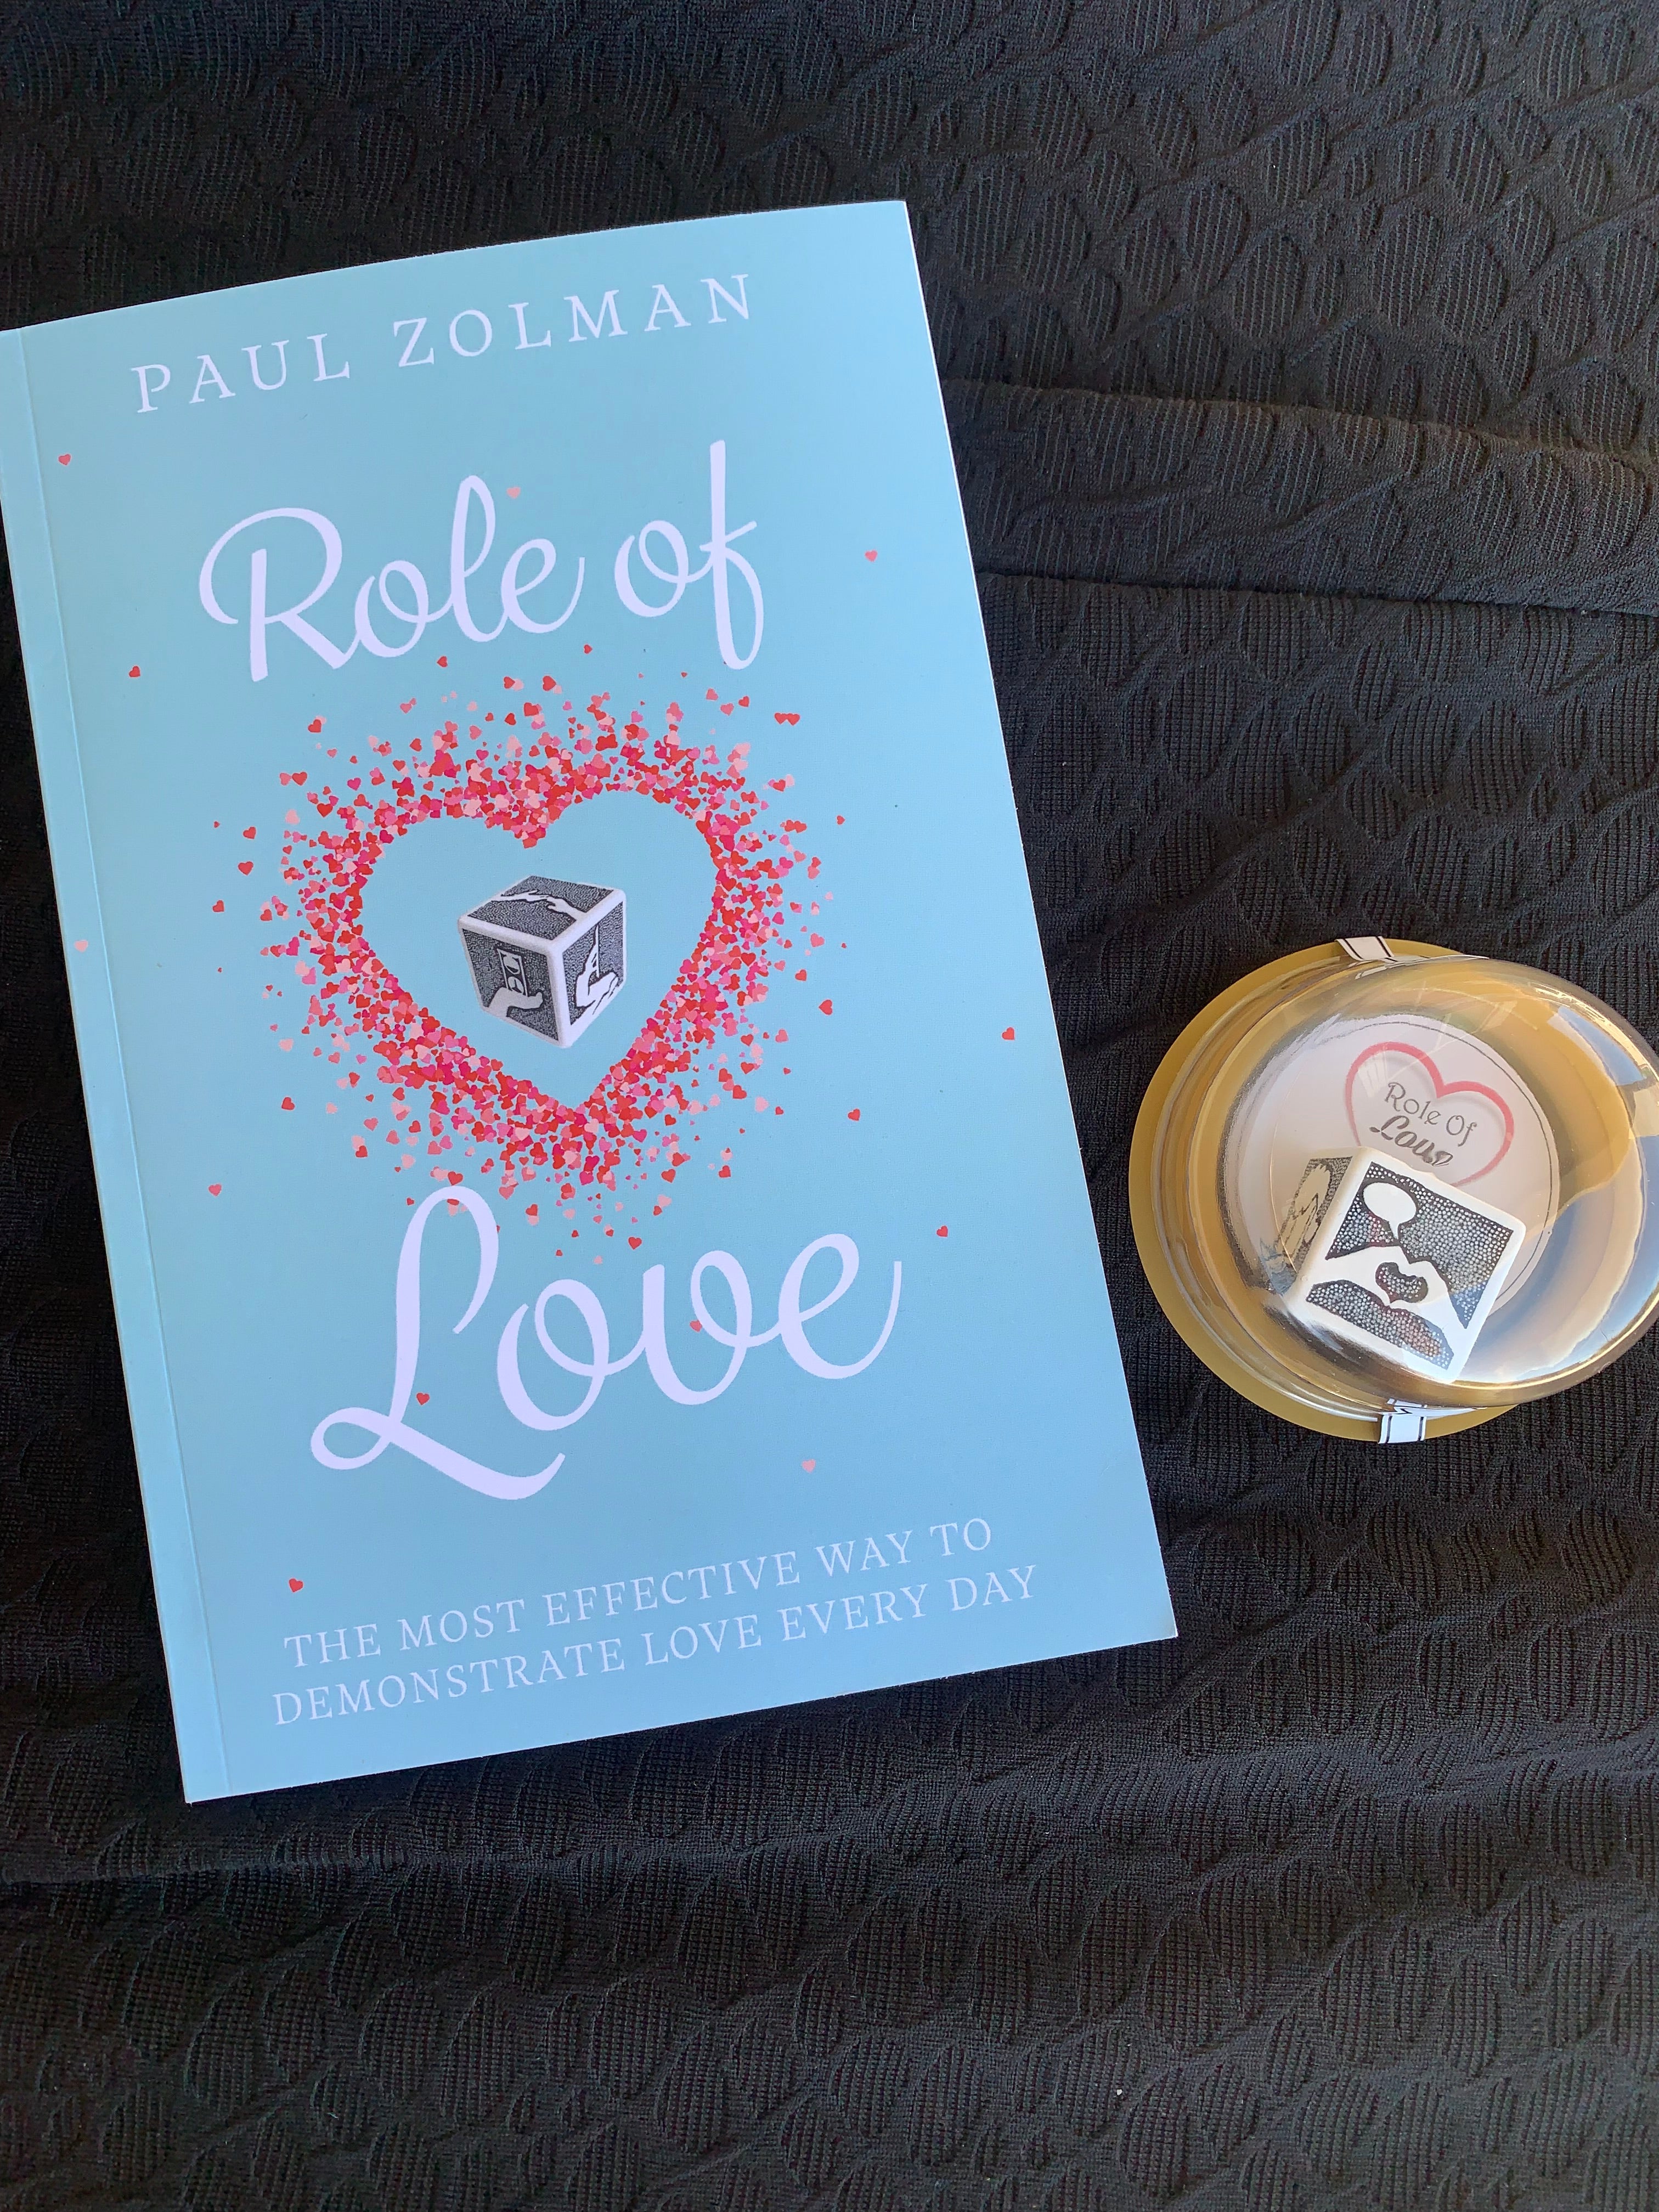 Role of Love book by author Paul Zolman and the love cube